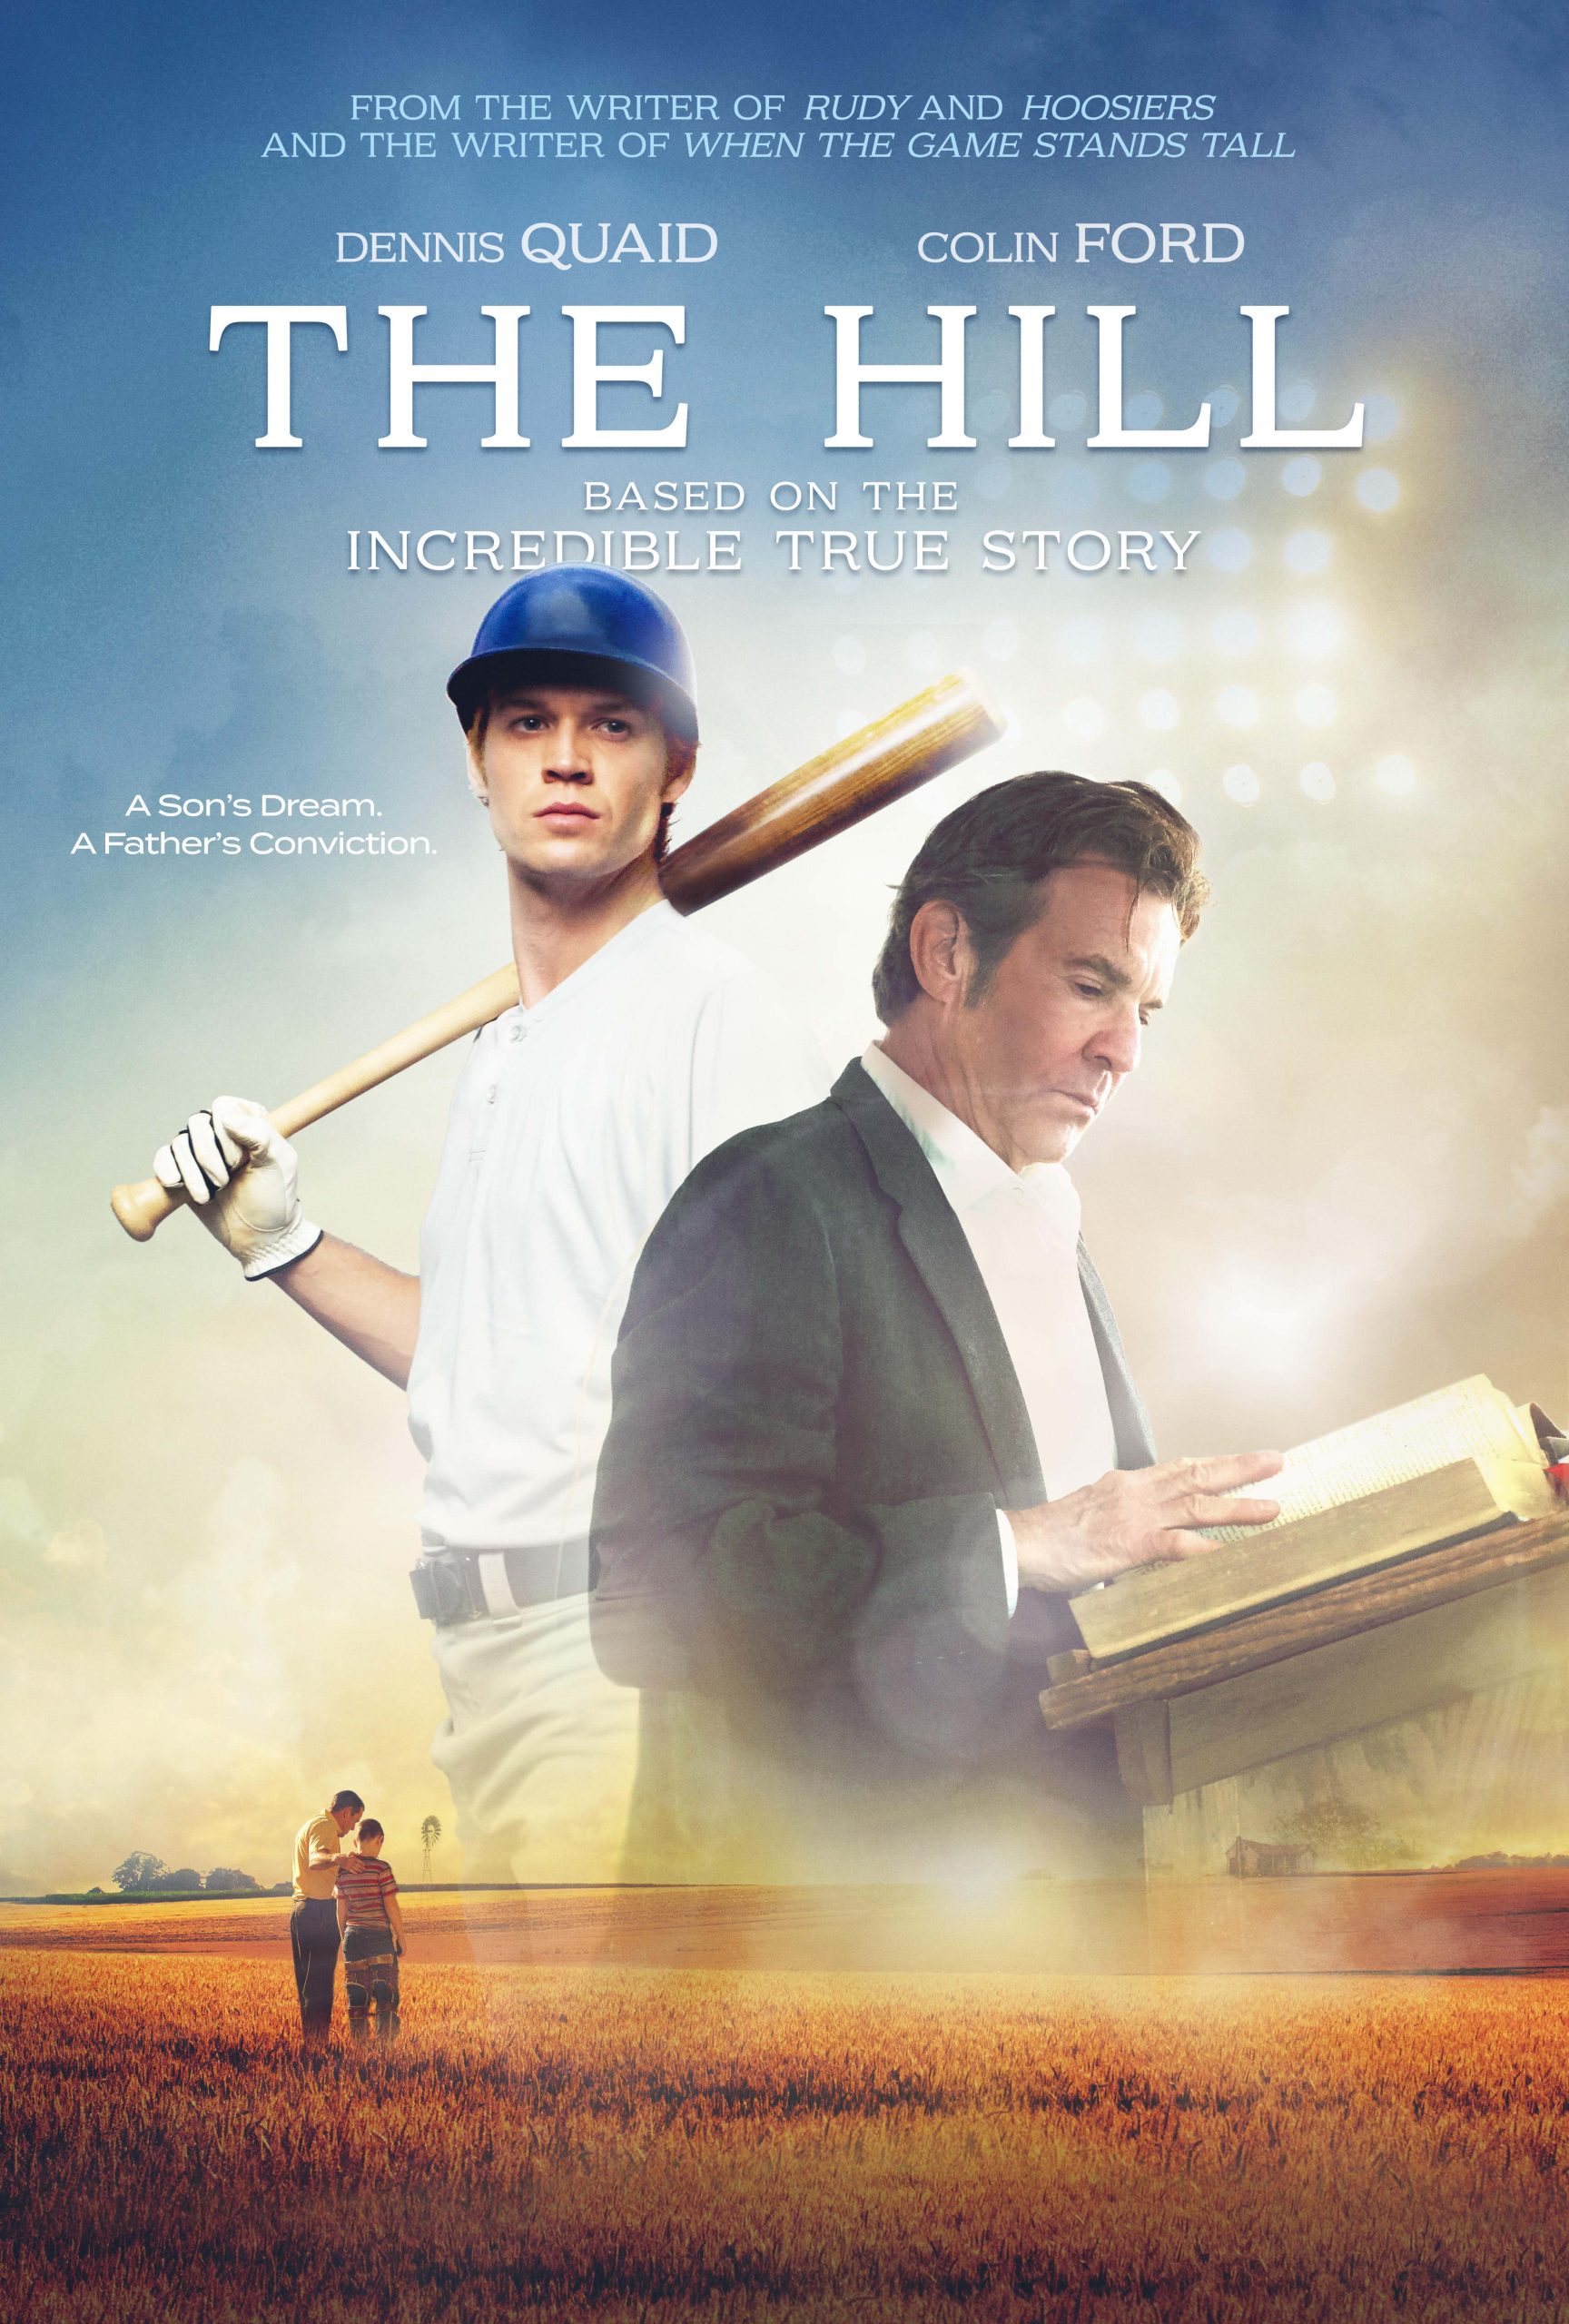 Review: 'The Hill' is the definition of a feel-good baseball flick of faith  - WTOP News